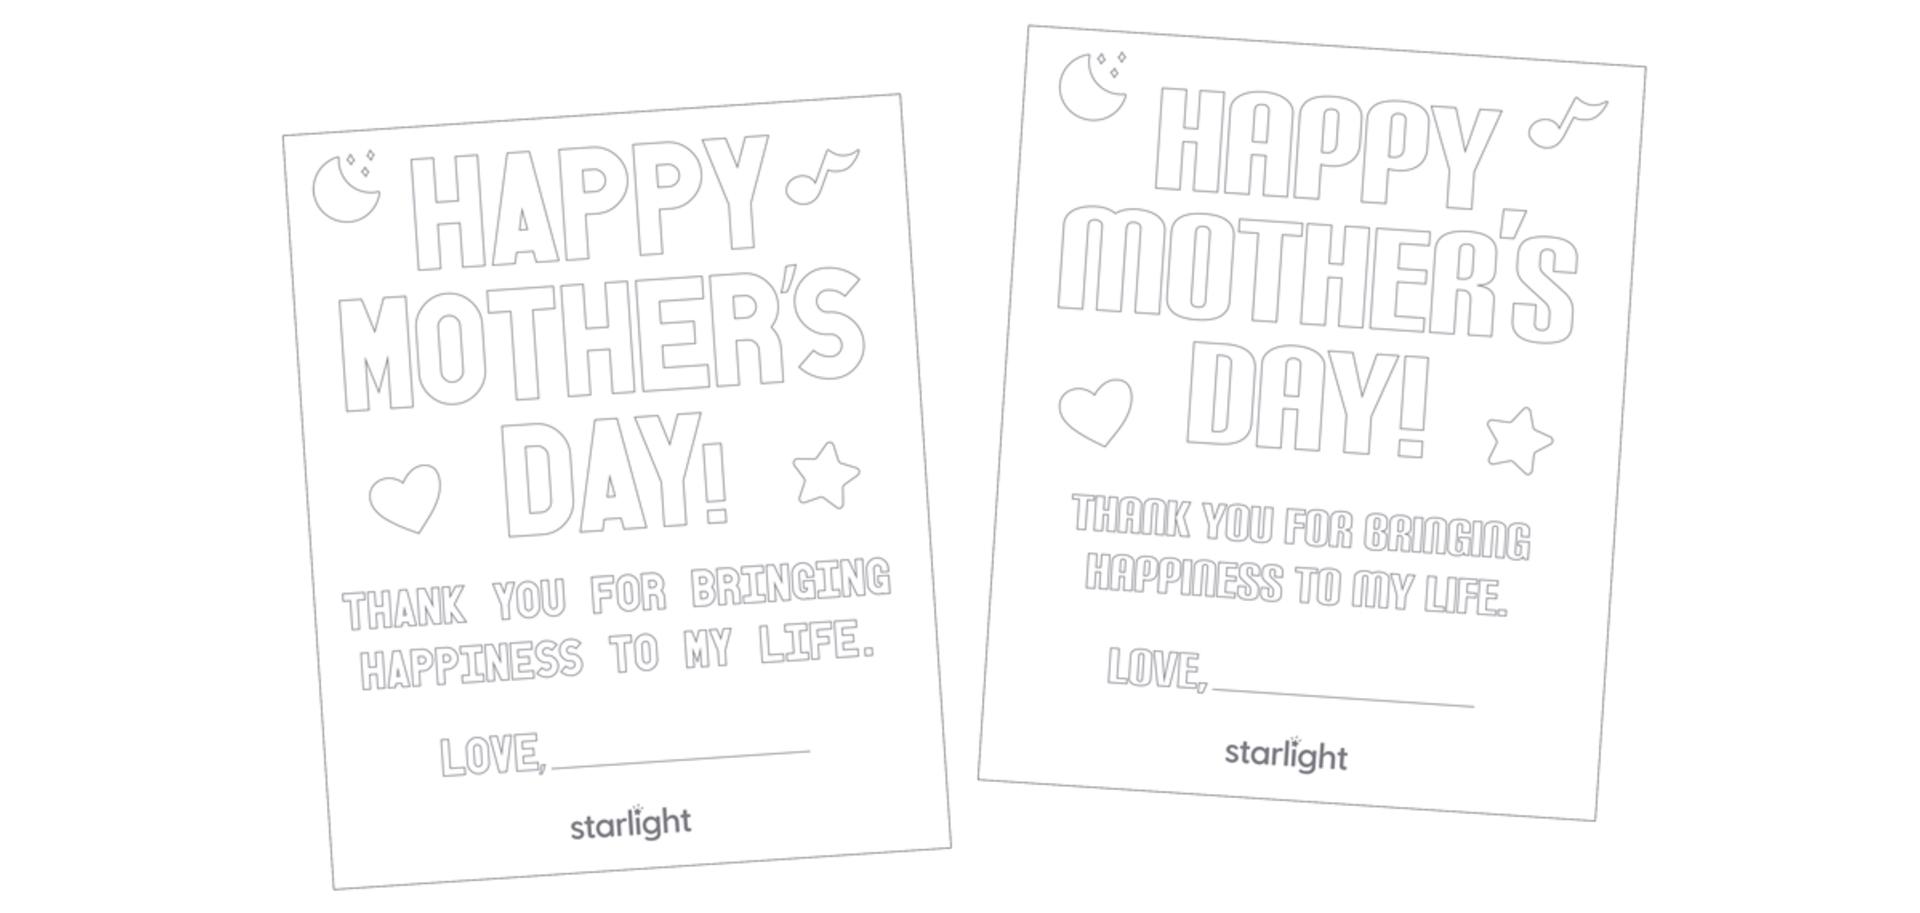 happy mother's day coloring page